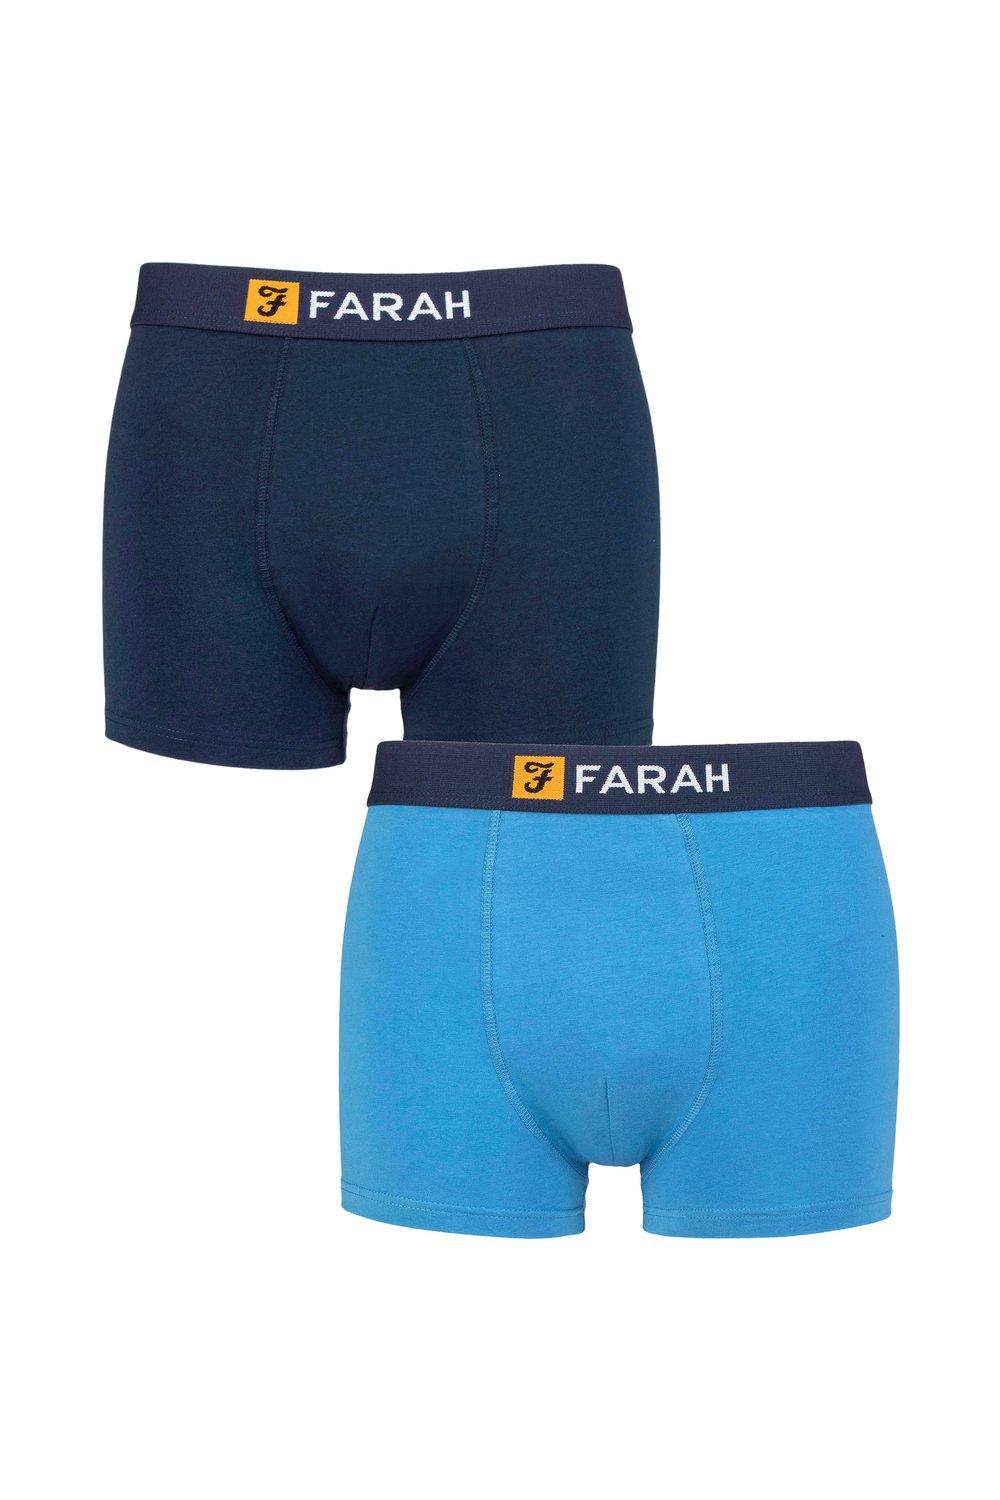 Mens 2 Pack Farah Plain Cotton Classic Fitted Trunks